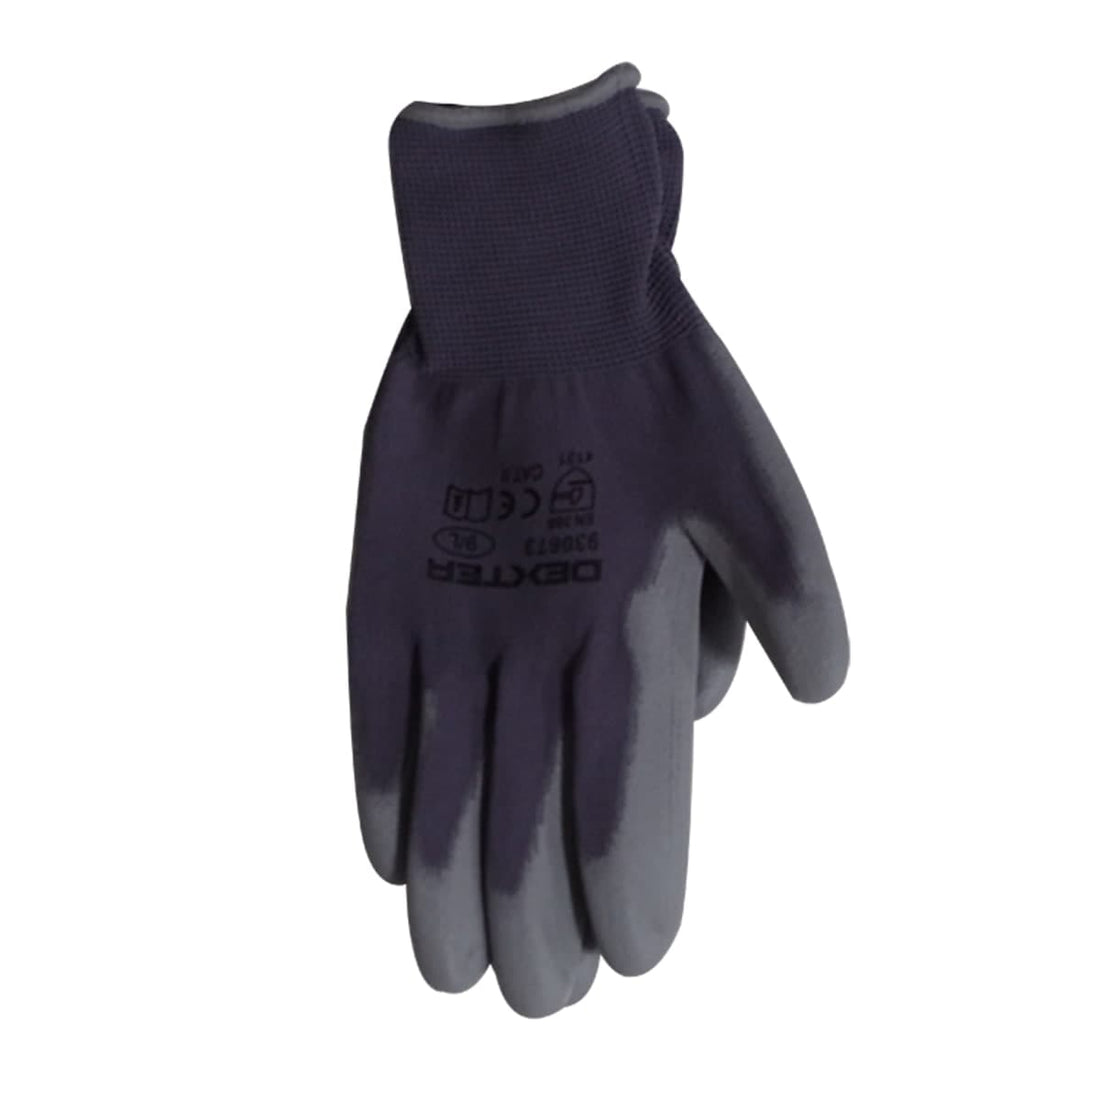 DEXTER NYLON GLOVES WITH POLYURETHANE COATING, SIZE 9, L, 5 PAIRS - best price from Maltashopper.com BR400001171